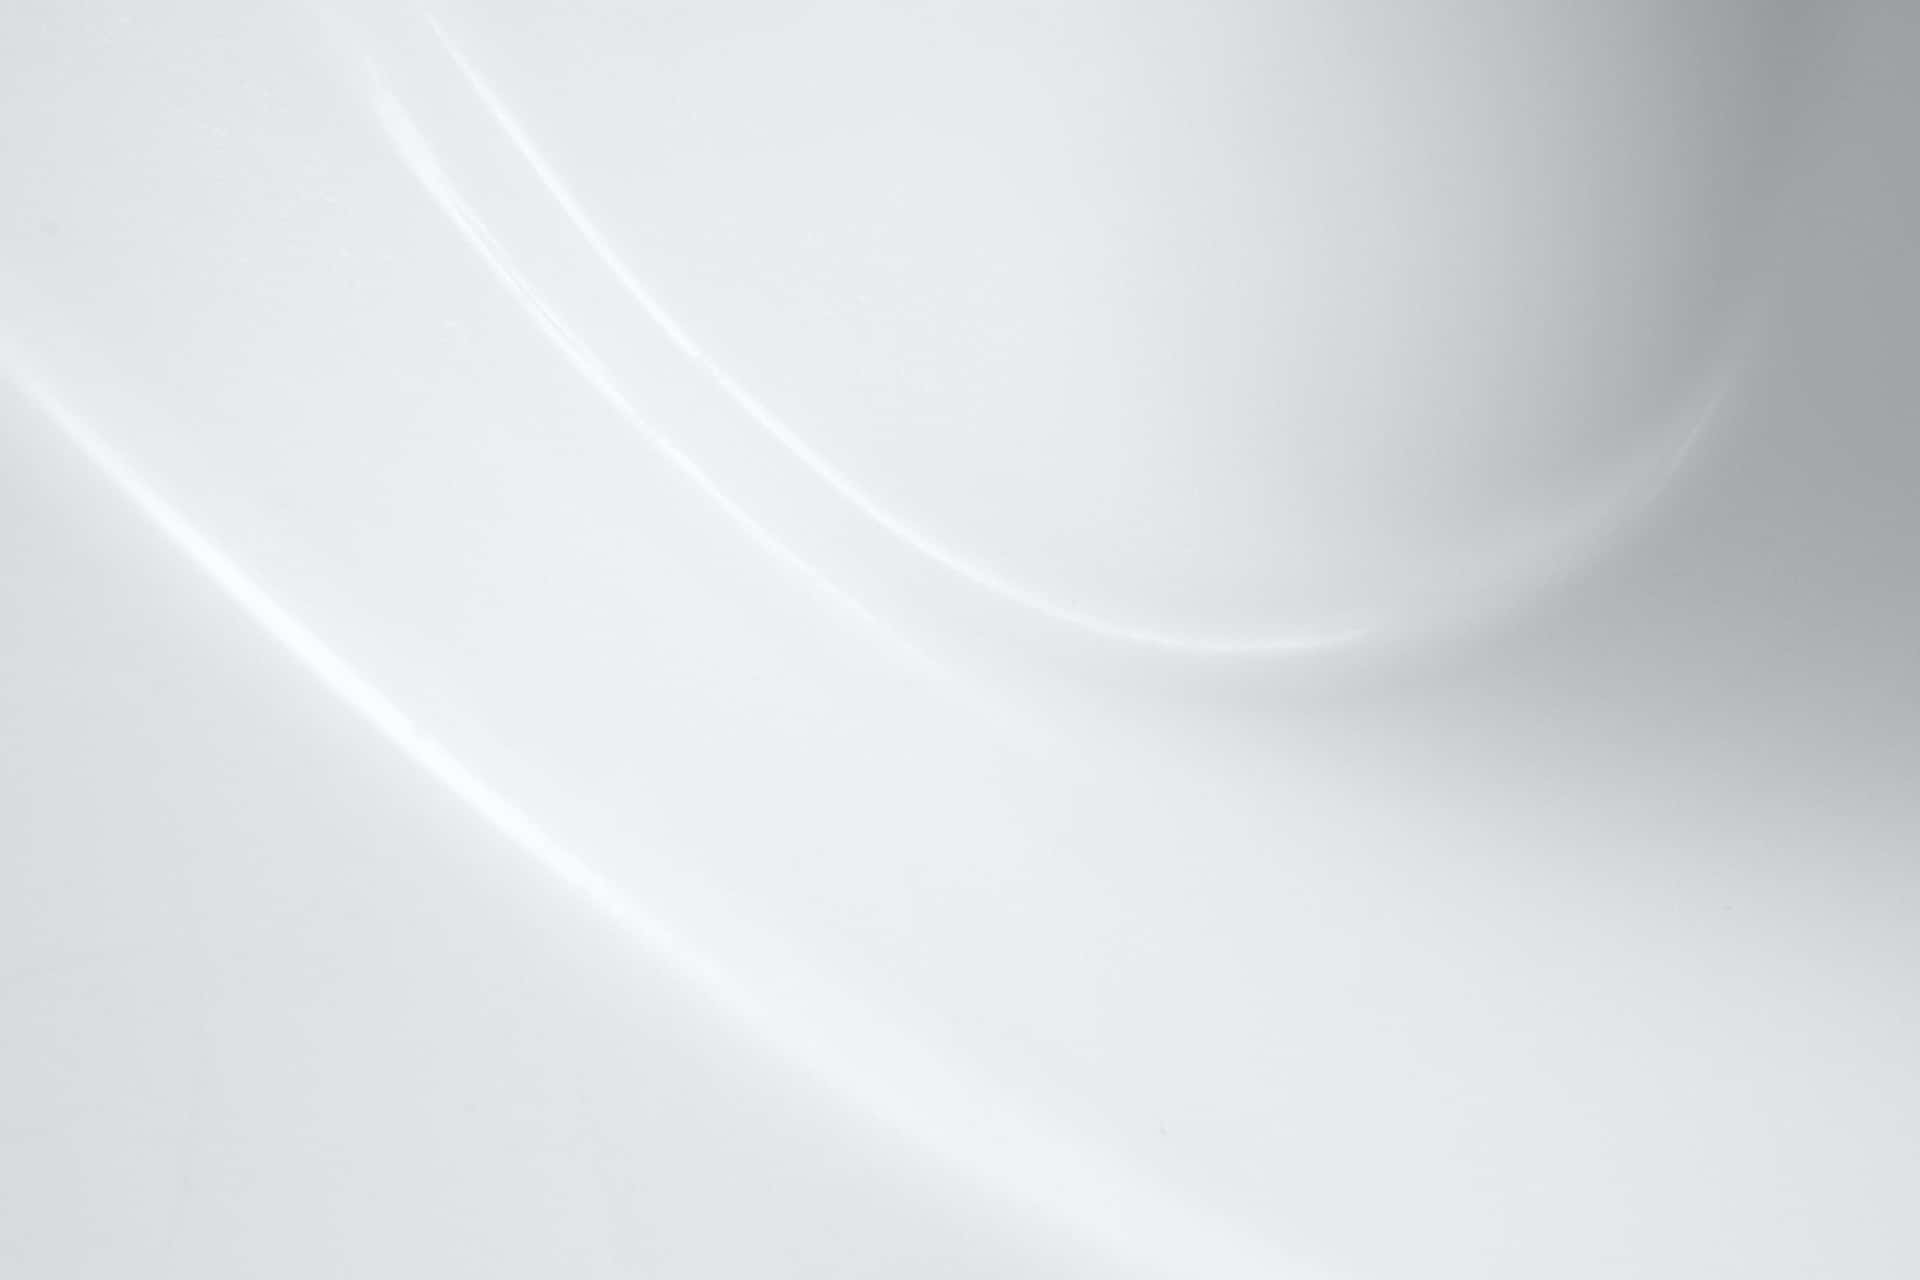 Glossy White Texture Abstract With Lines Background